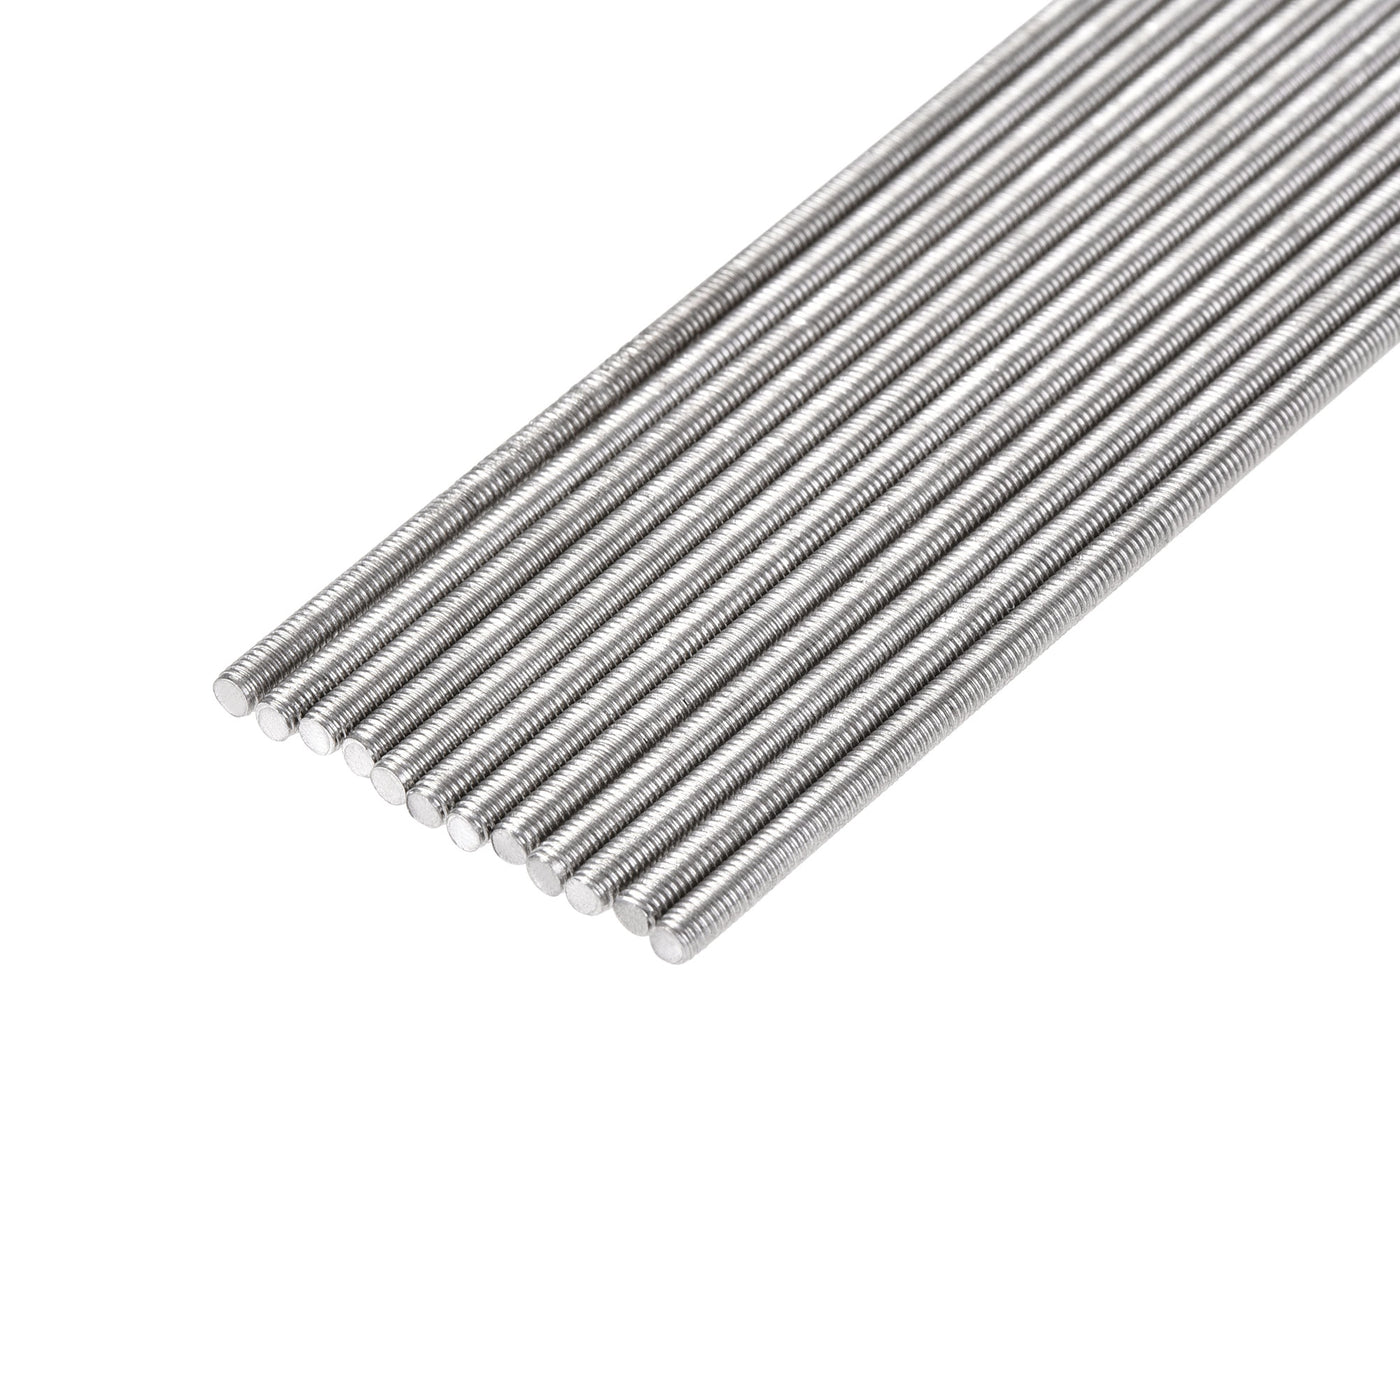 uxcell Uxcell 12Pcs M3 x 250mm Fully Threaded Rod 304 Stainless Steel Right Hand Threads